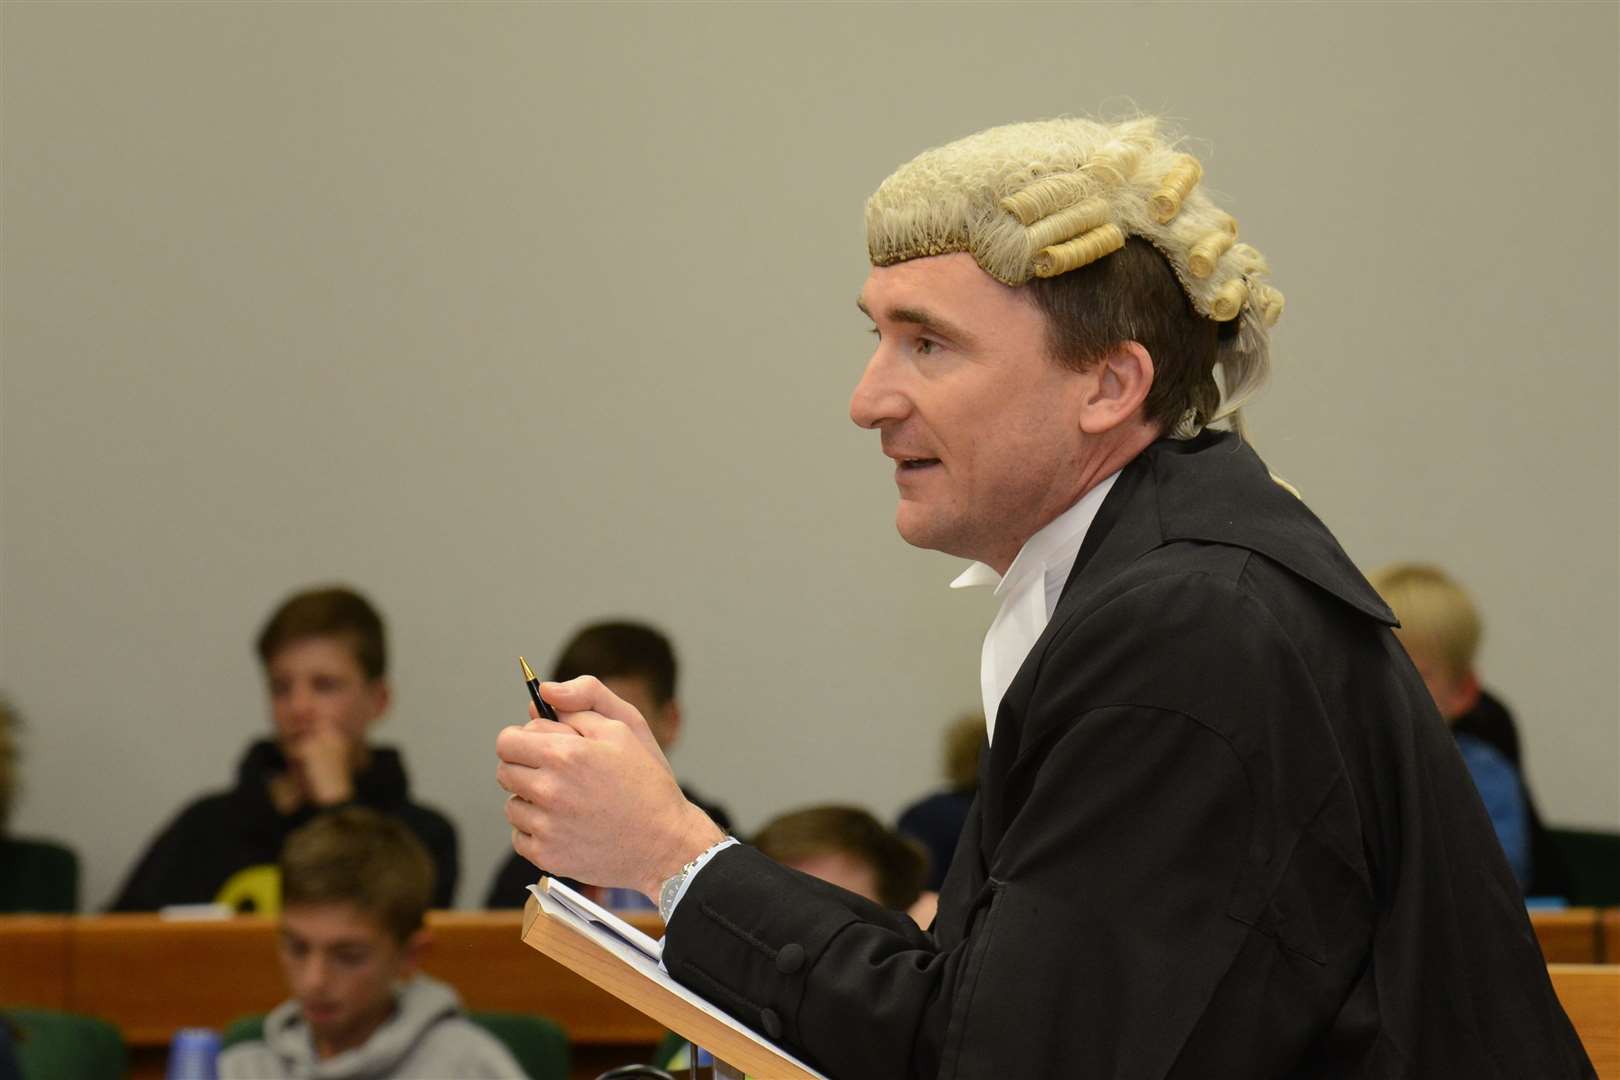 Oliver Saxby KC has been appointed a judge at Maidstone Crown Court